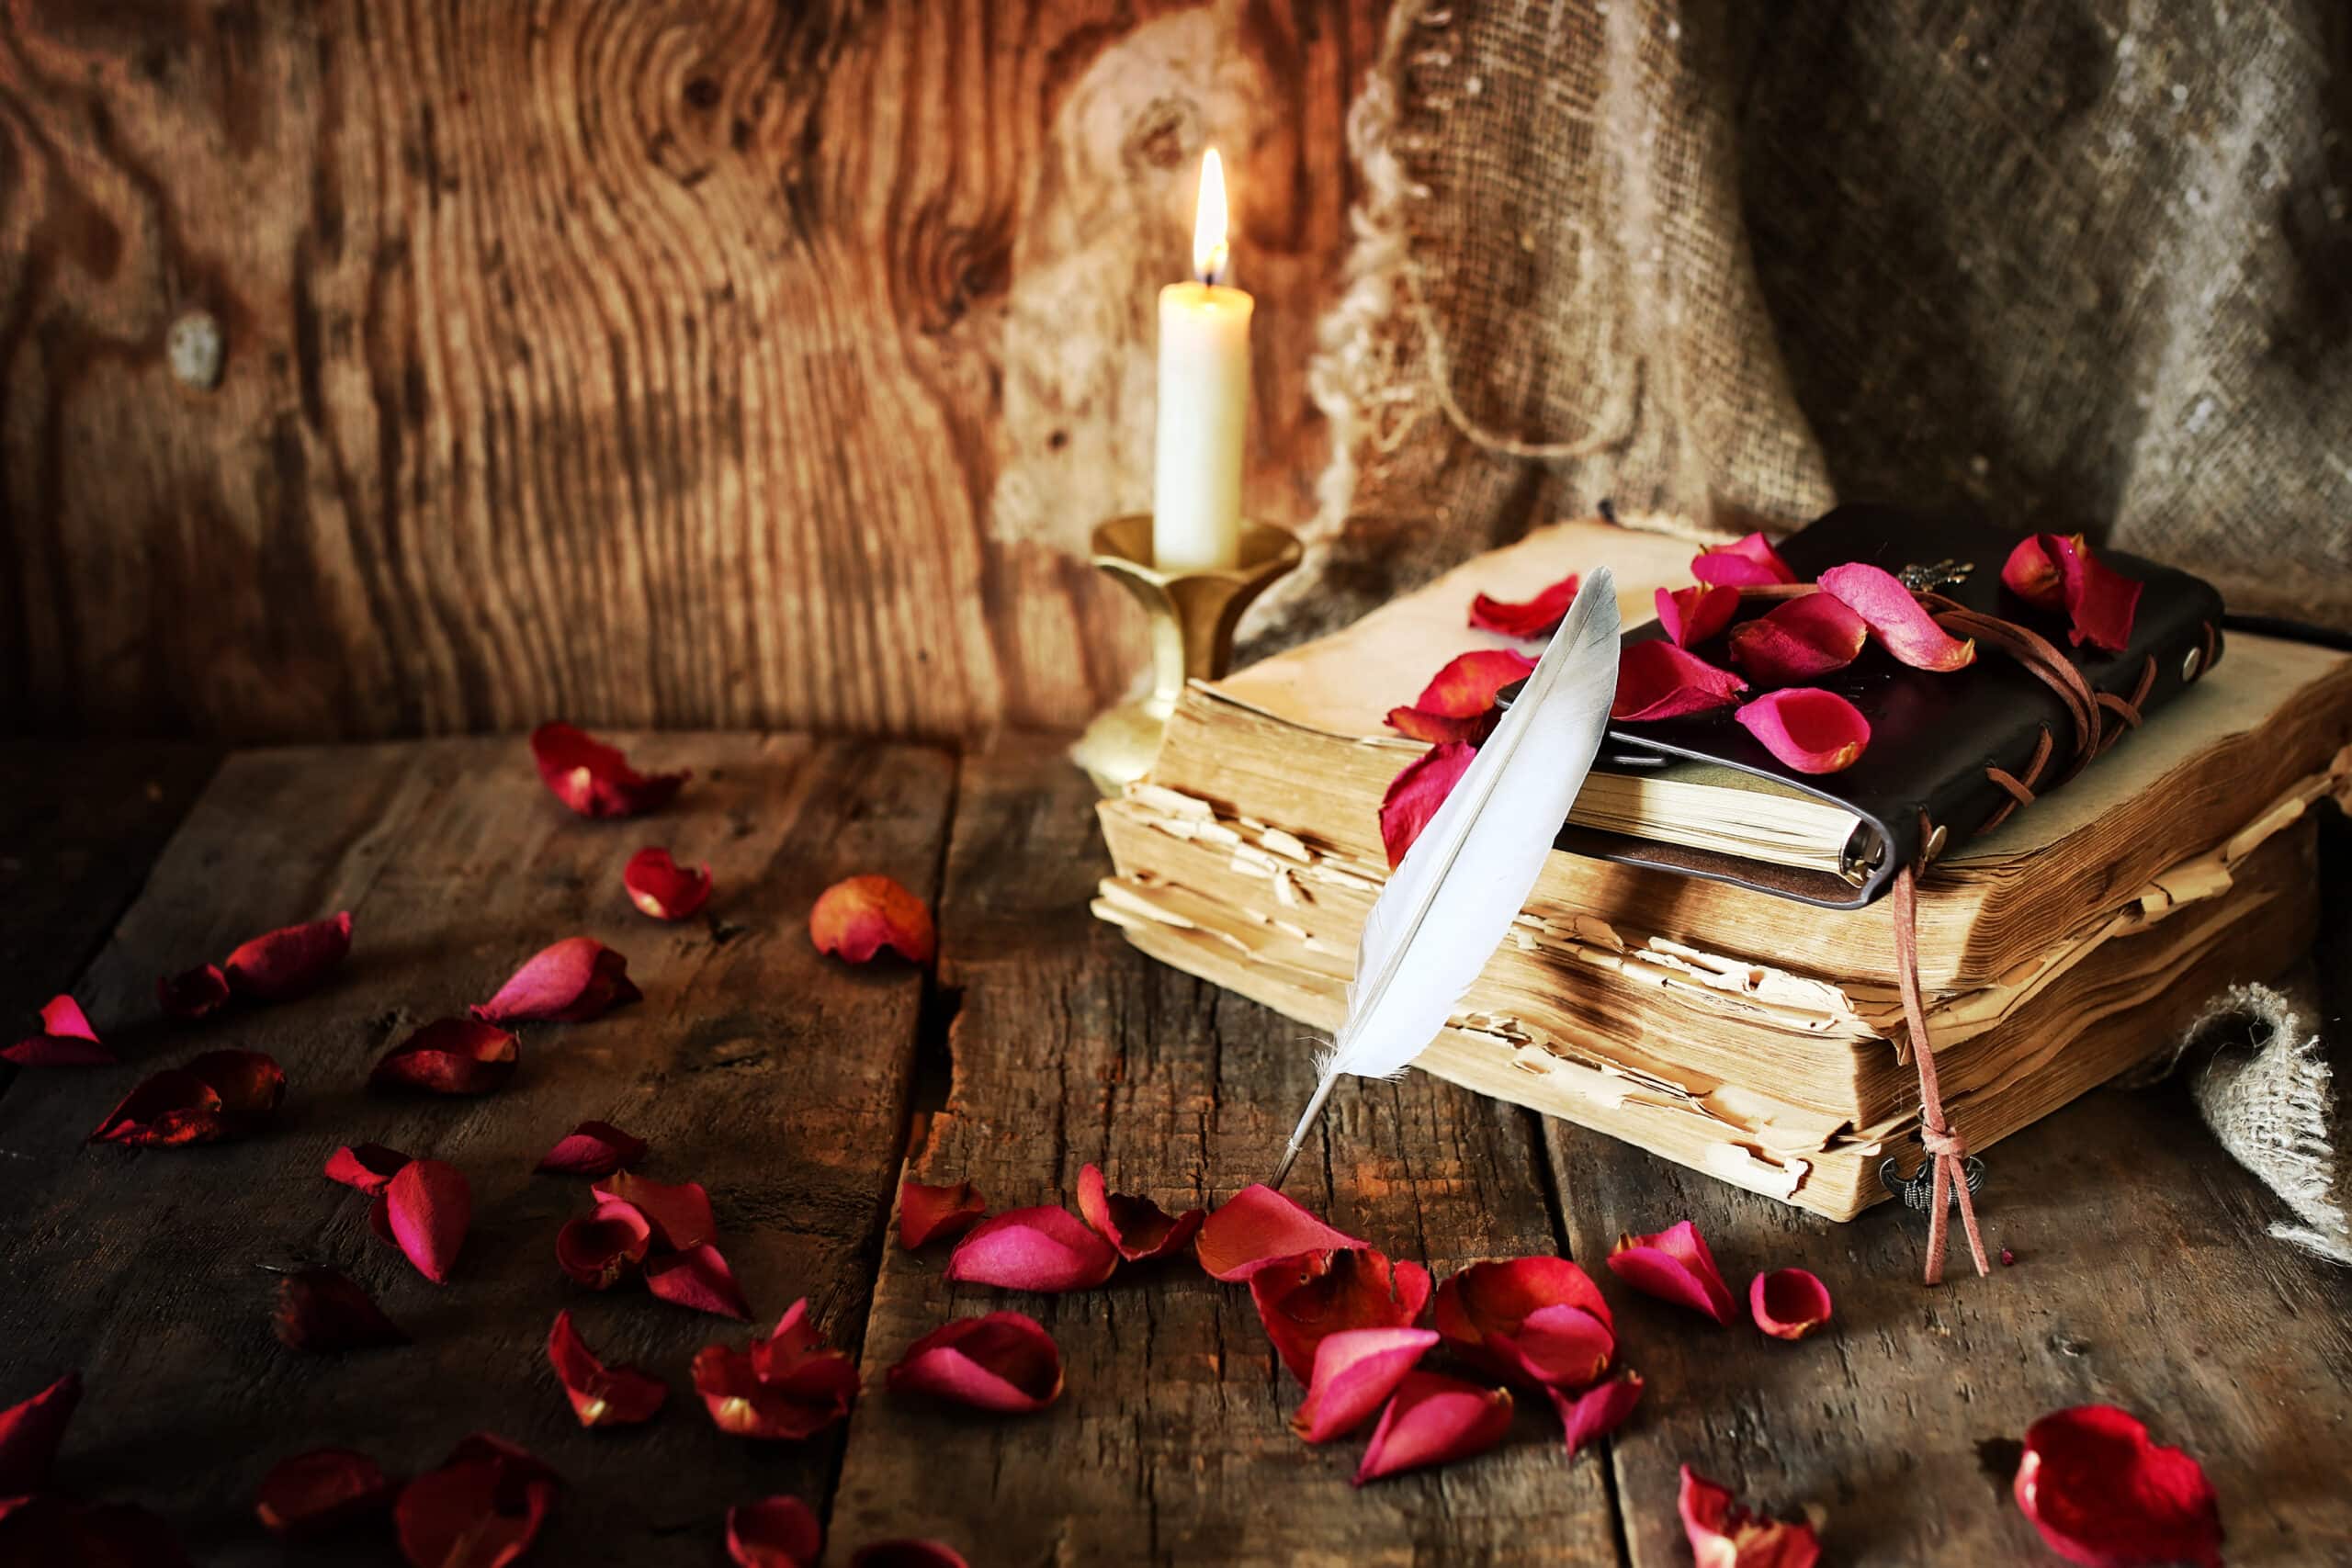 a book, quill pen, and a lit candle